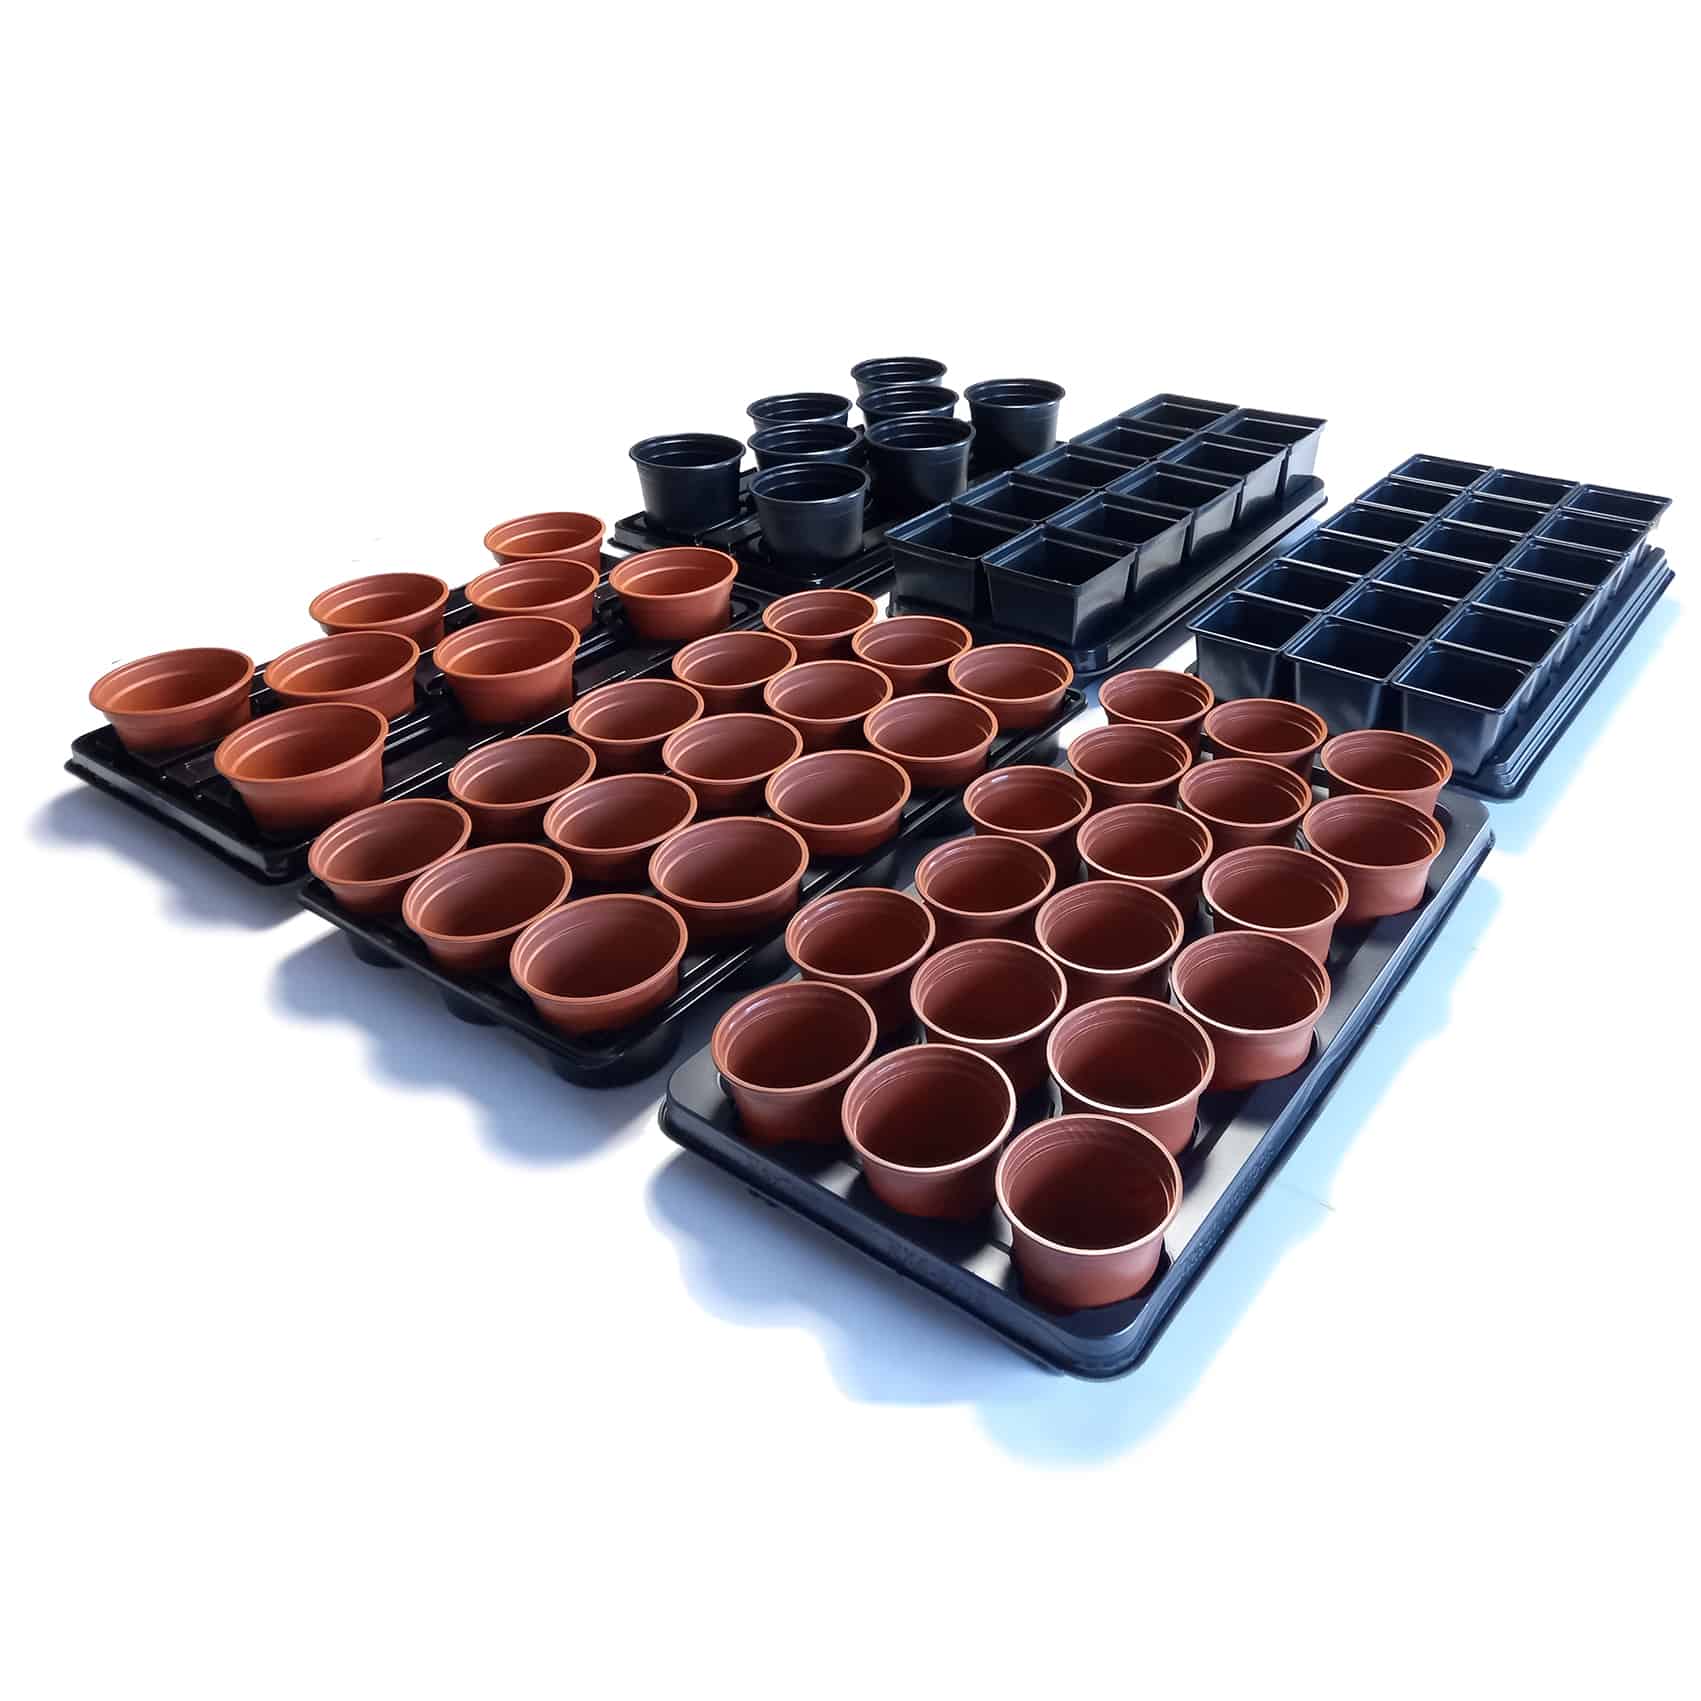 2" 25 x 6cm Carry Trays For 6cm Round Plastic Plant Pots Holds 40 